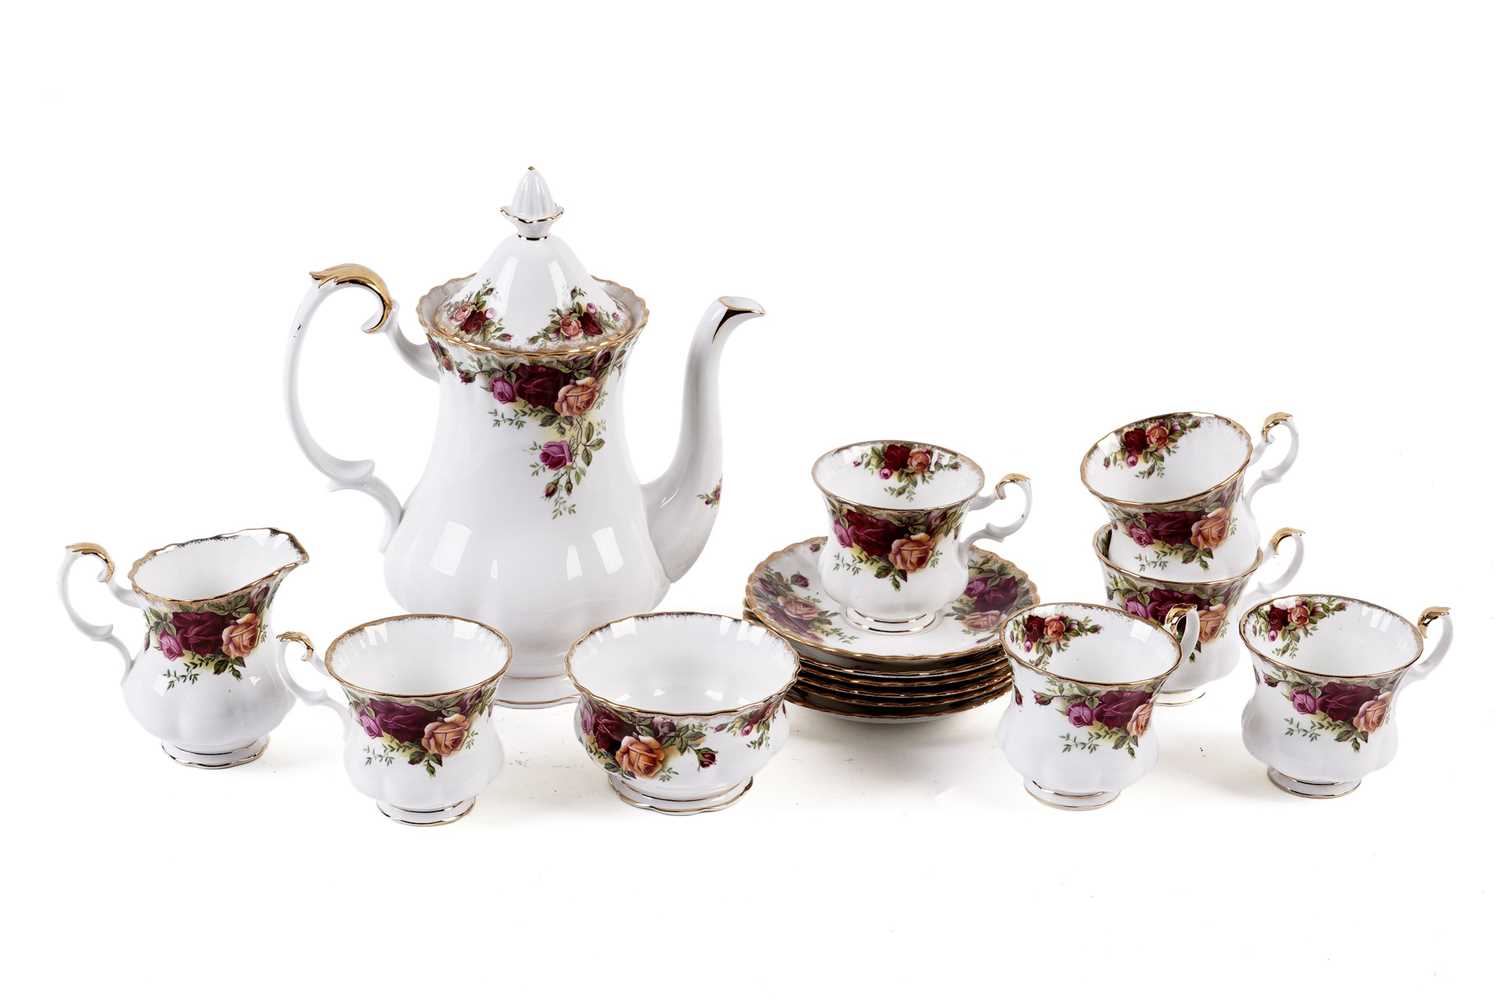 A Royal Albert ‘Old Country Roses’ pattern tea service